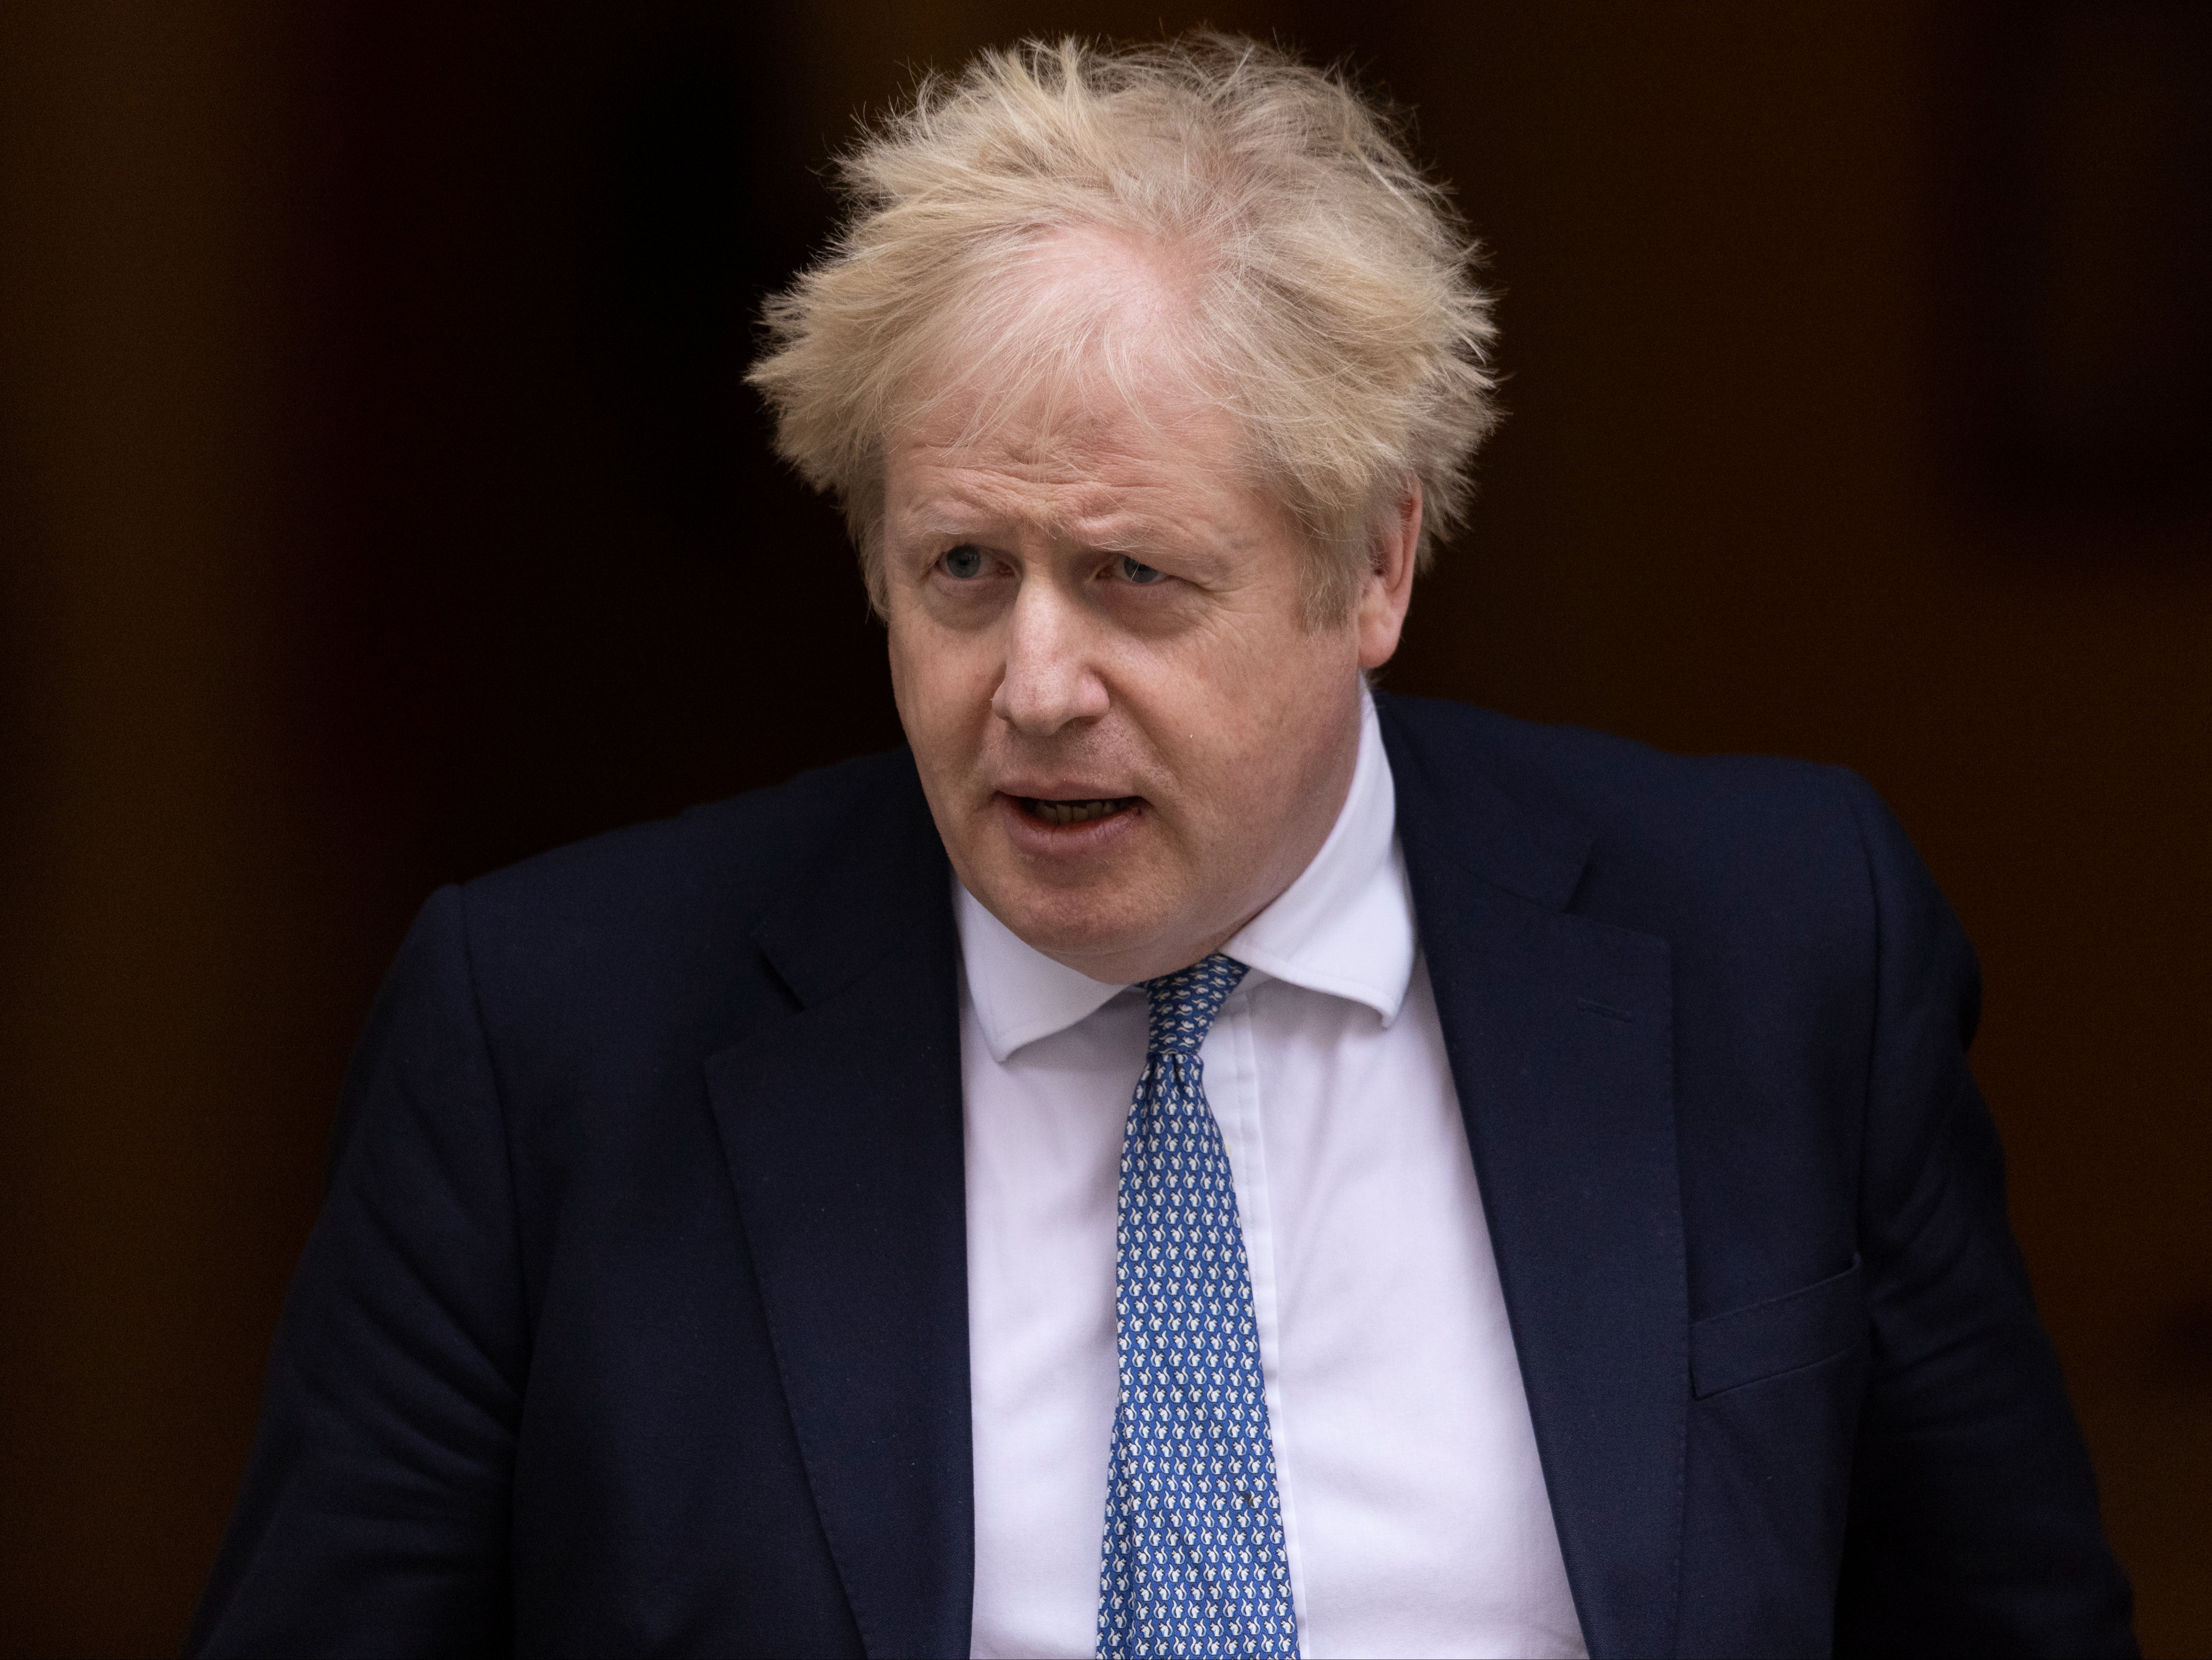 PM Boris Johnson is expected to deny any wrongdoing to police